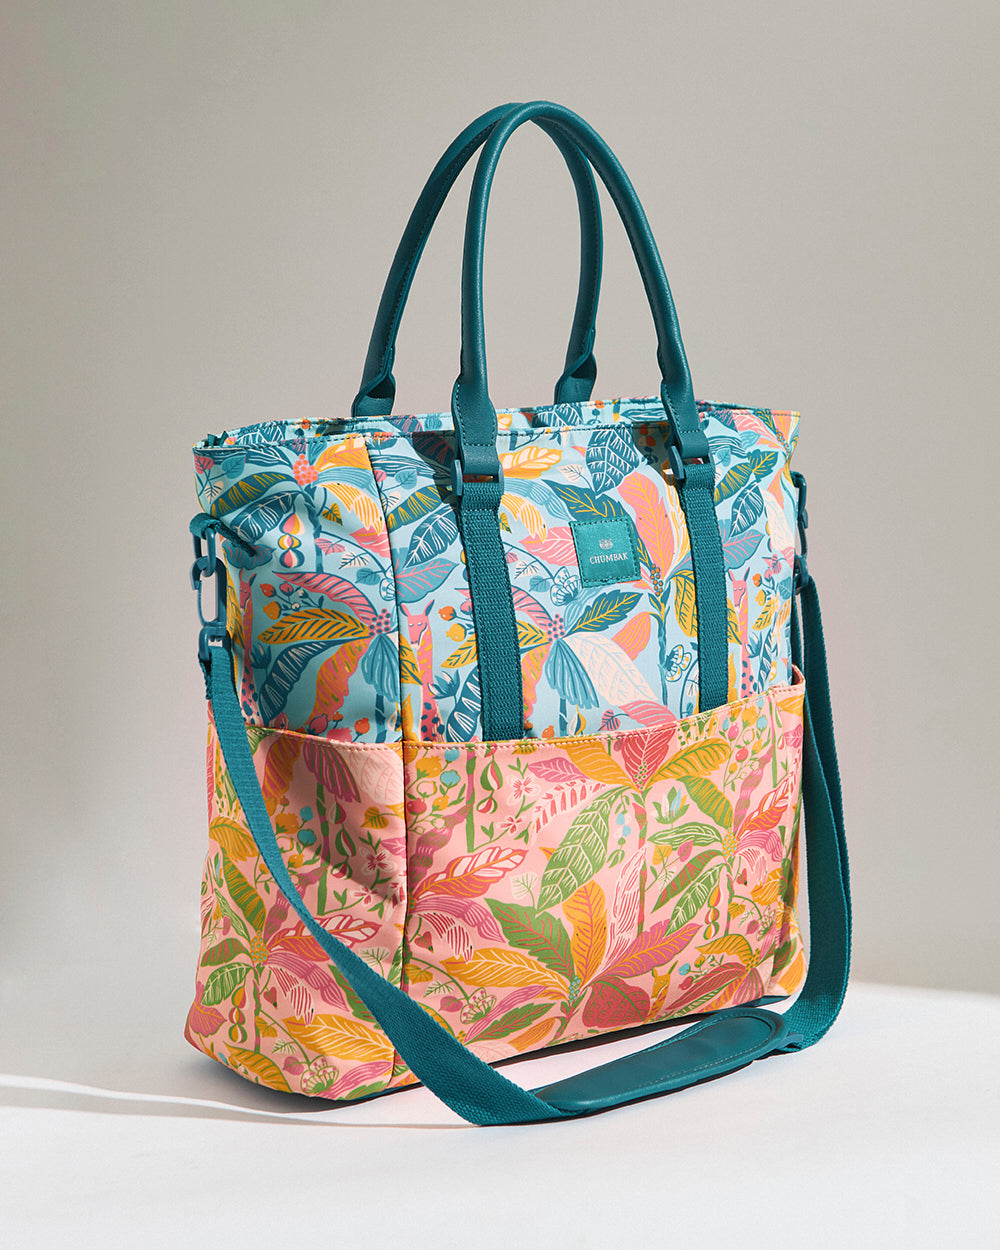 Travel Tote | Large Sized | Adjustable Cross Body Strap | Water Resistant Fabric